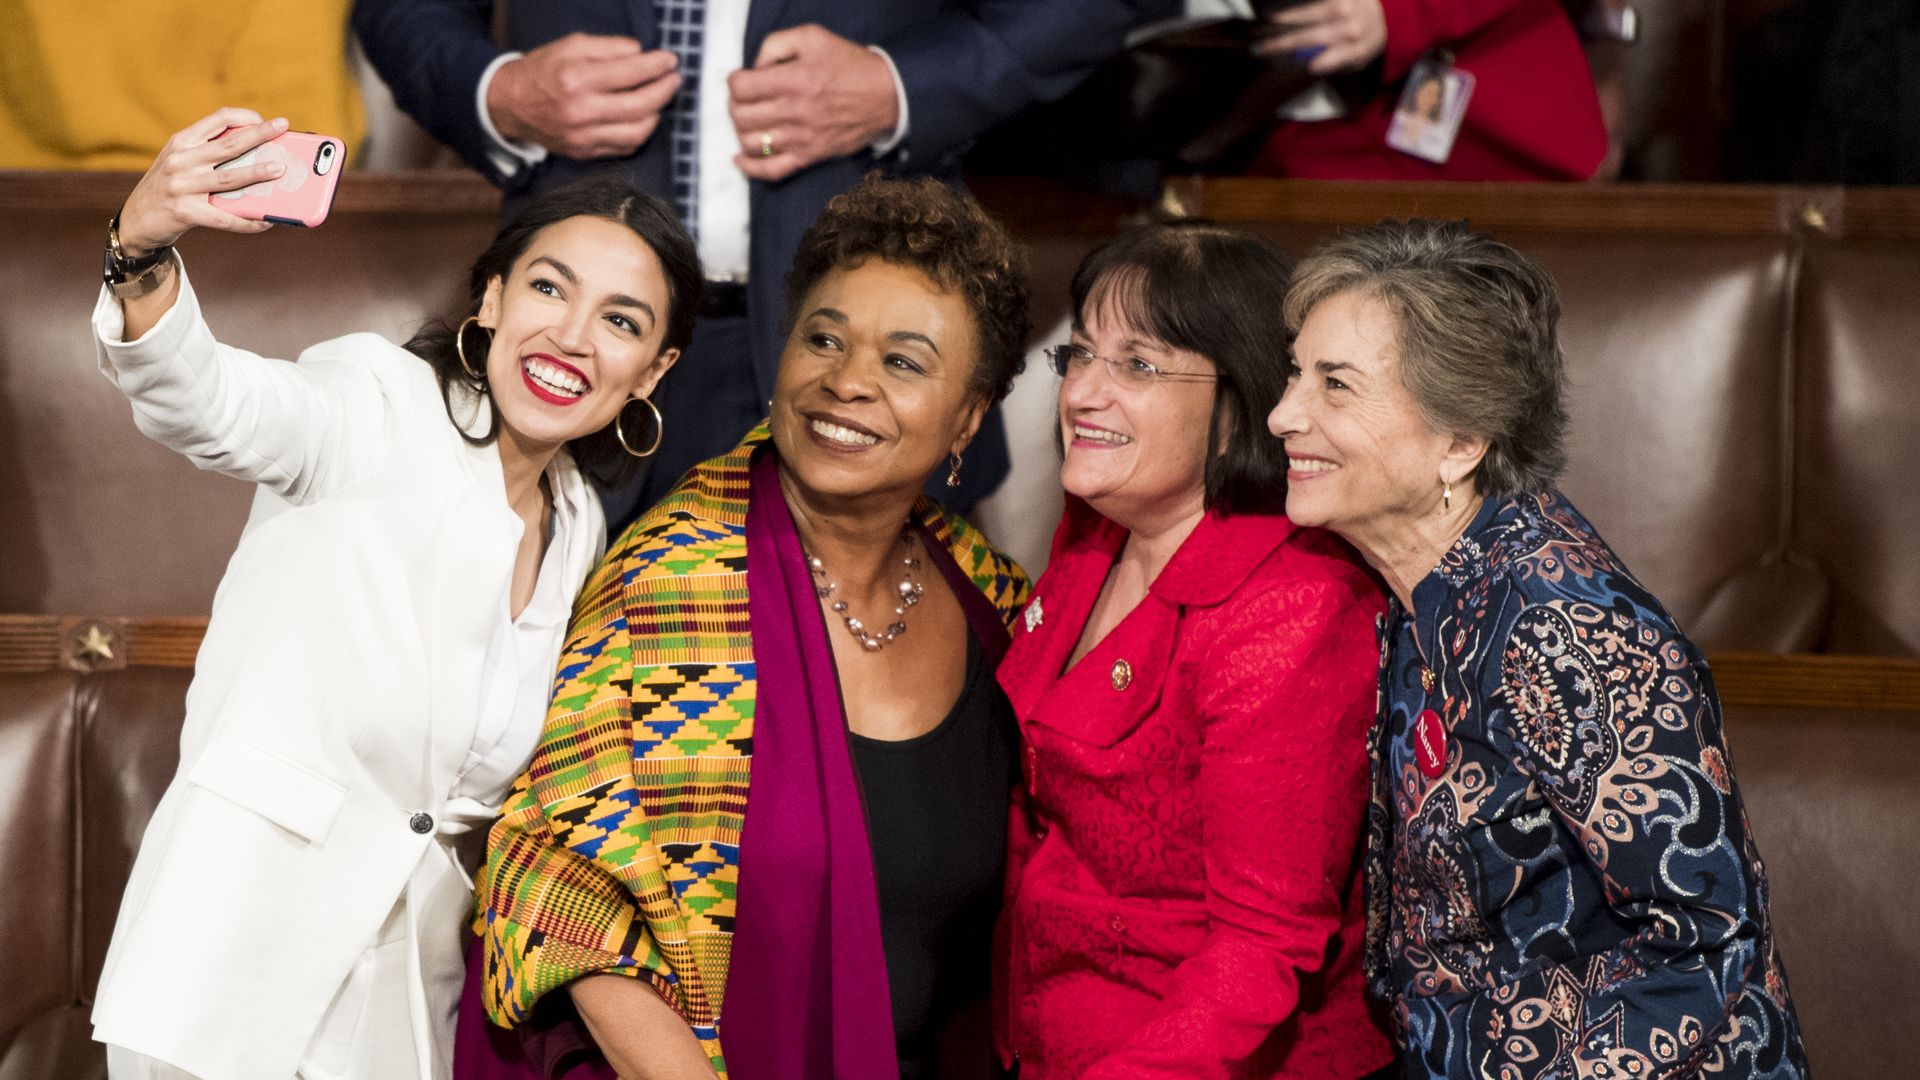 Freshman Reps. from left, Alexandria Ocasio-Cortez, D-N.Y., Barbara Lee, D-Texas, Annie Kuster, D-N.H., and Jan Schakowsky, D-Ill., take a selfie on the House floor before the start of the election 